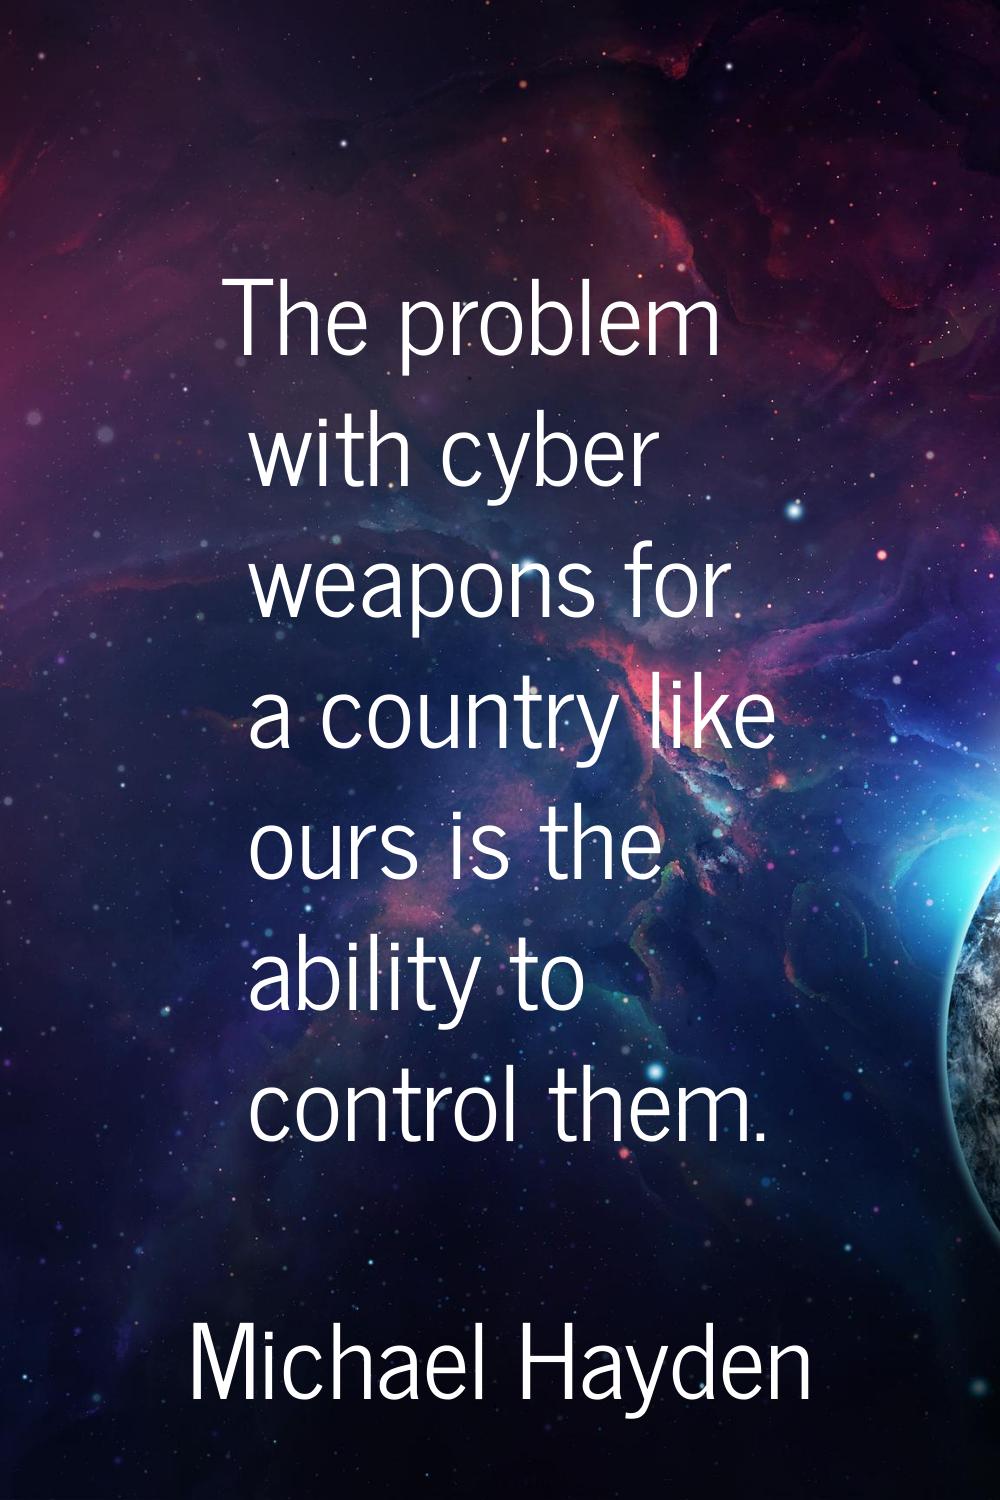 The problem with cyber weapons for a country like ours is the ability to control them.